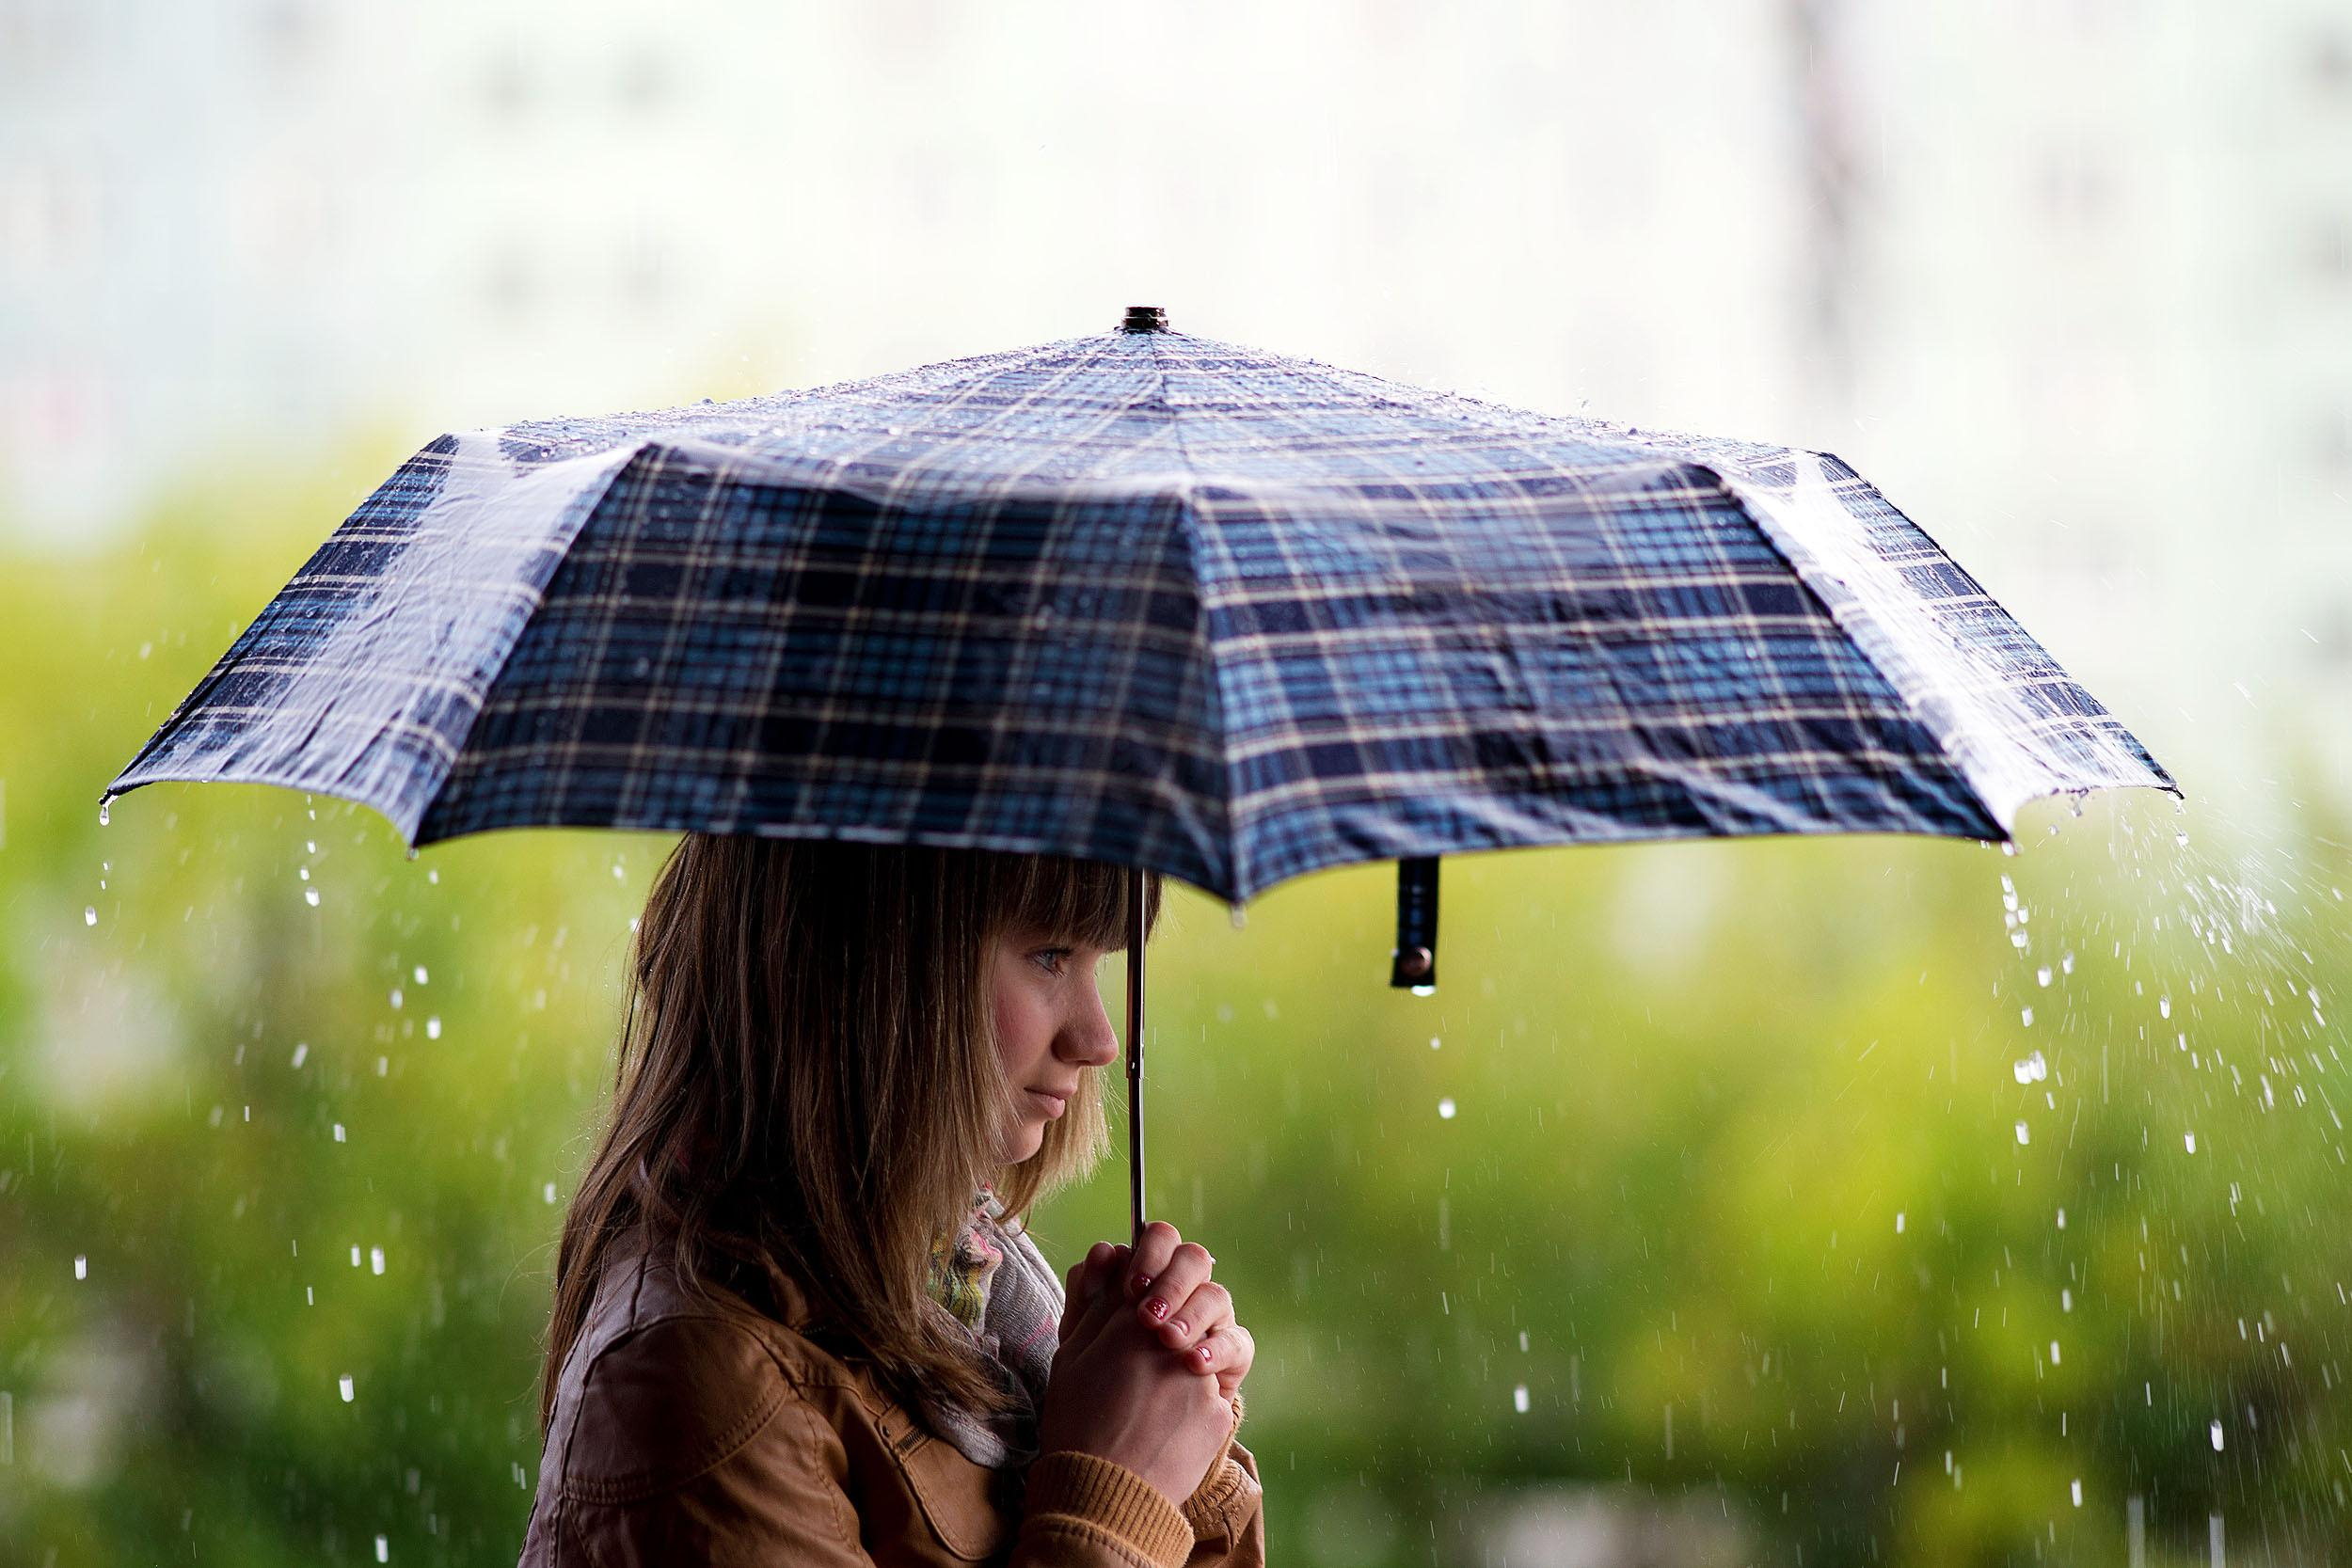 2500x1667 Download Girl holding umbrella rainy day Profile pics of boys for your mobile cell phone